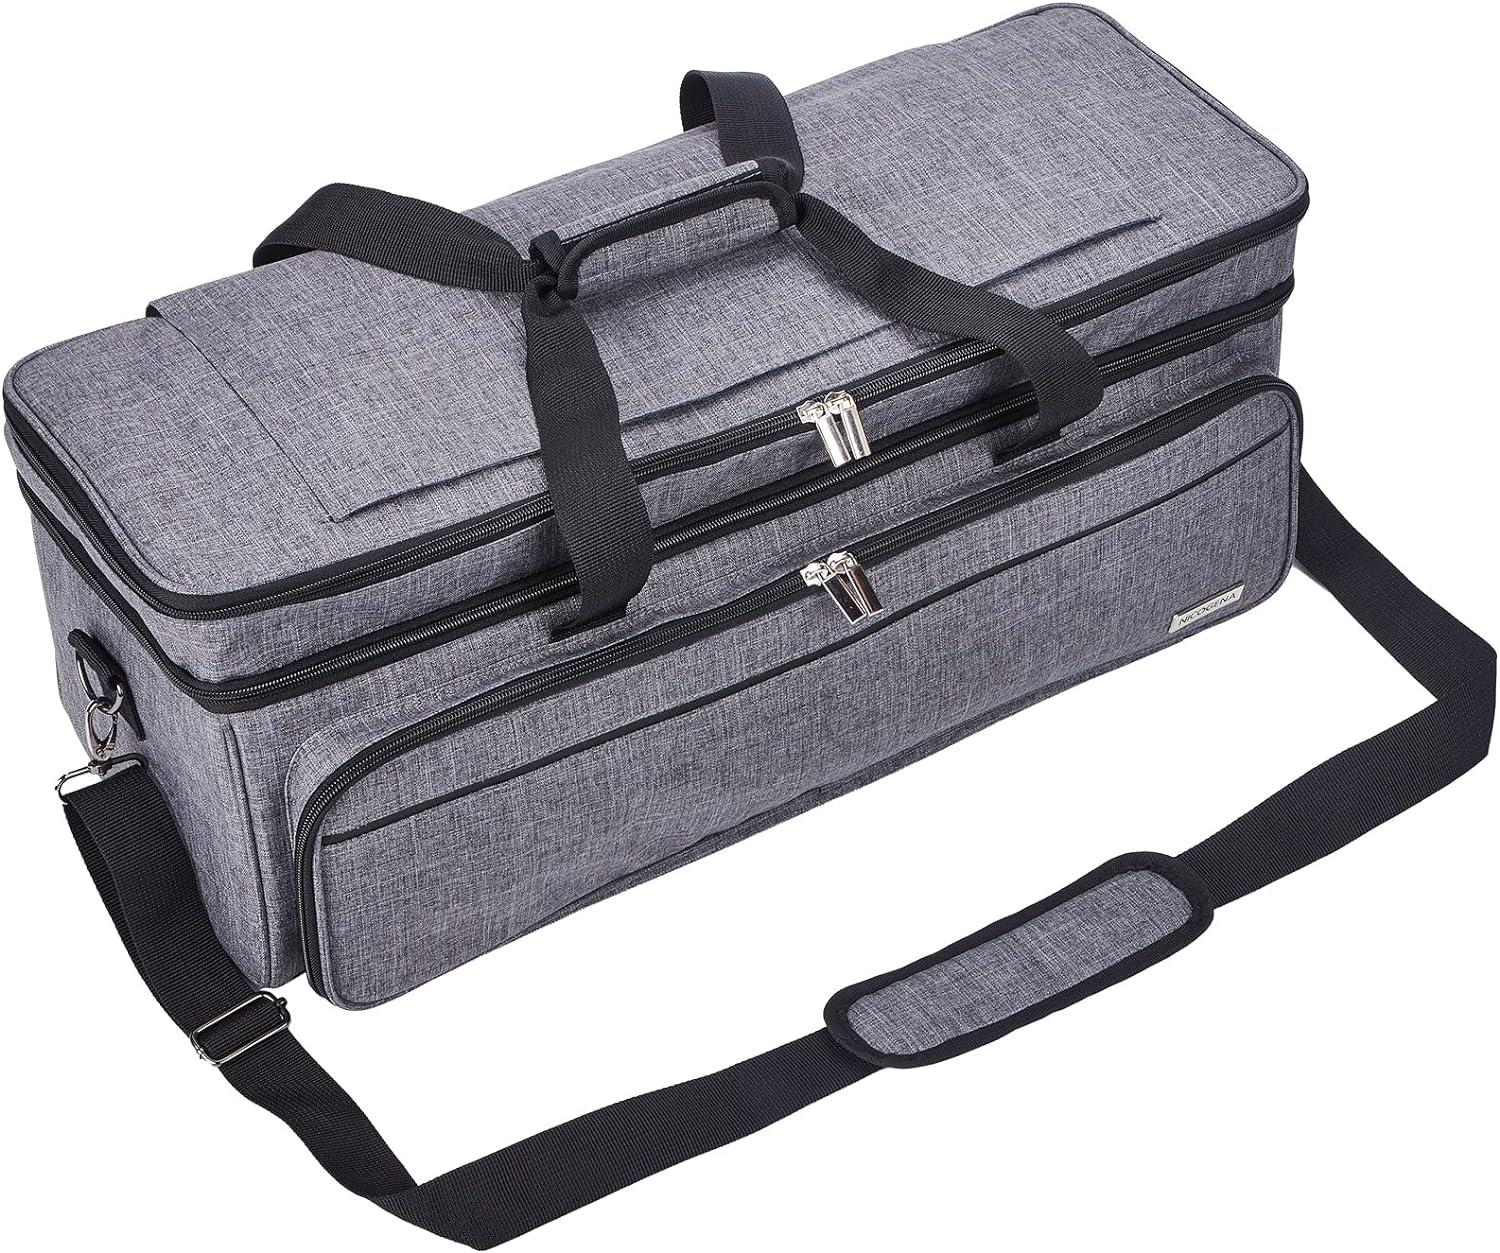  NICOGENA Double Layer Carrying Case with Mat Pocket